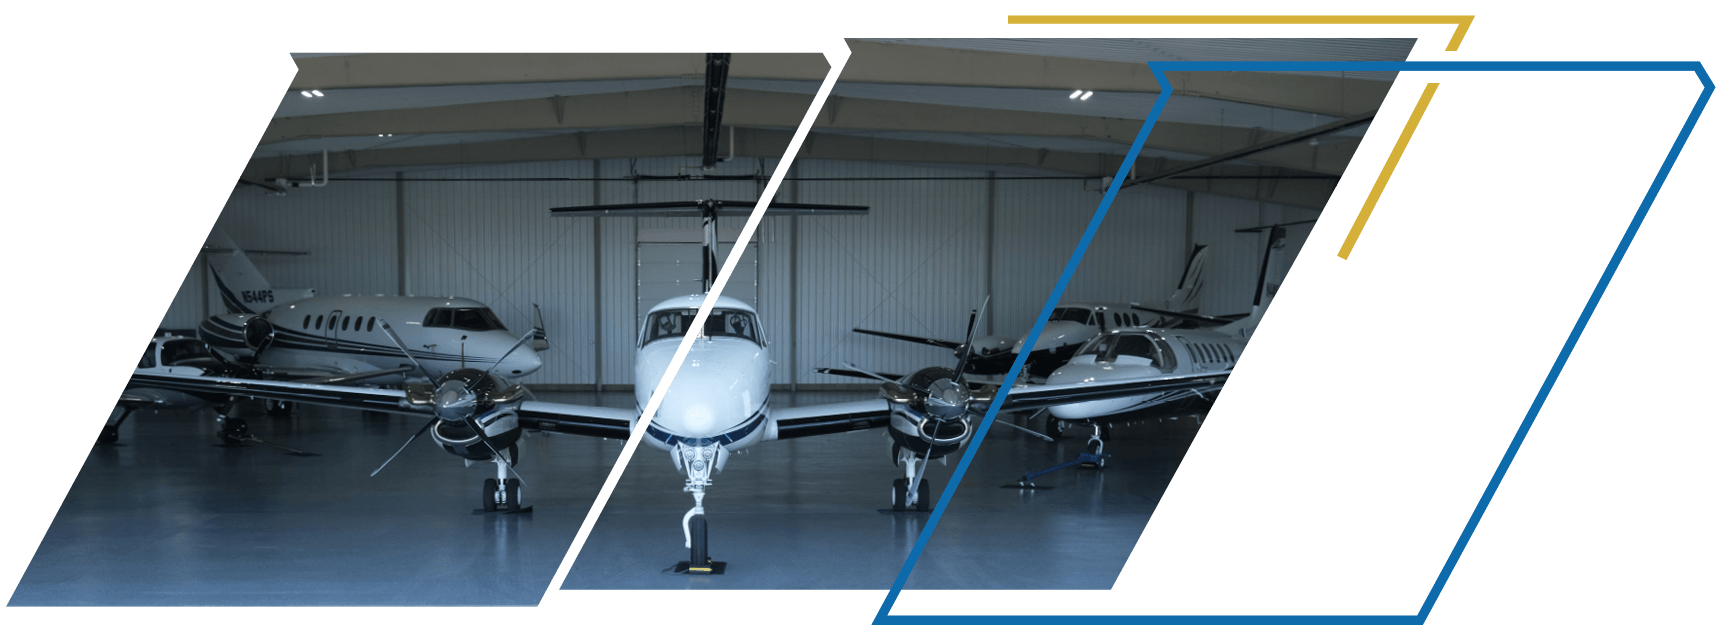 Griffing flying service provides individualized & personalized attention for your aircraft